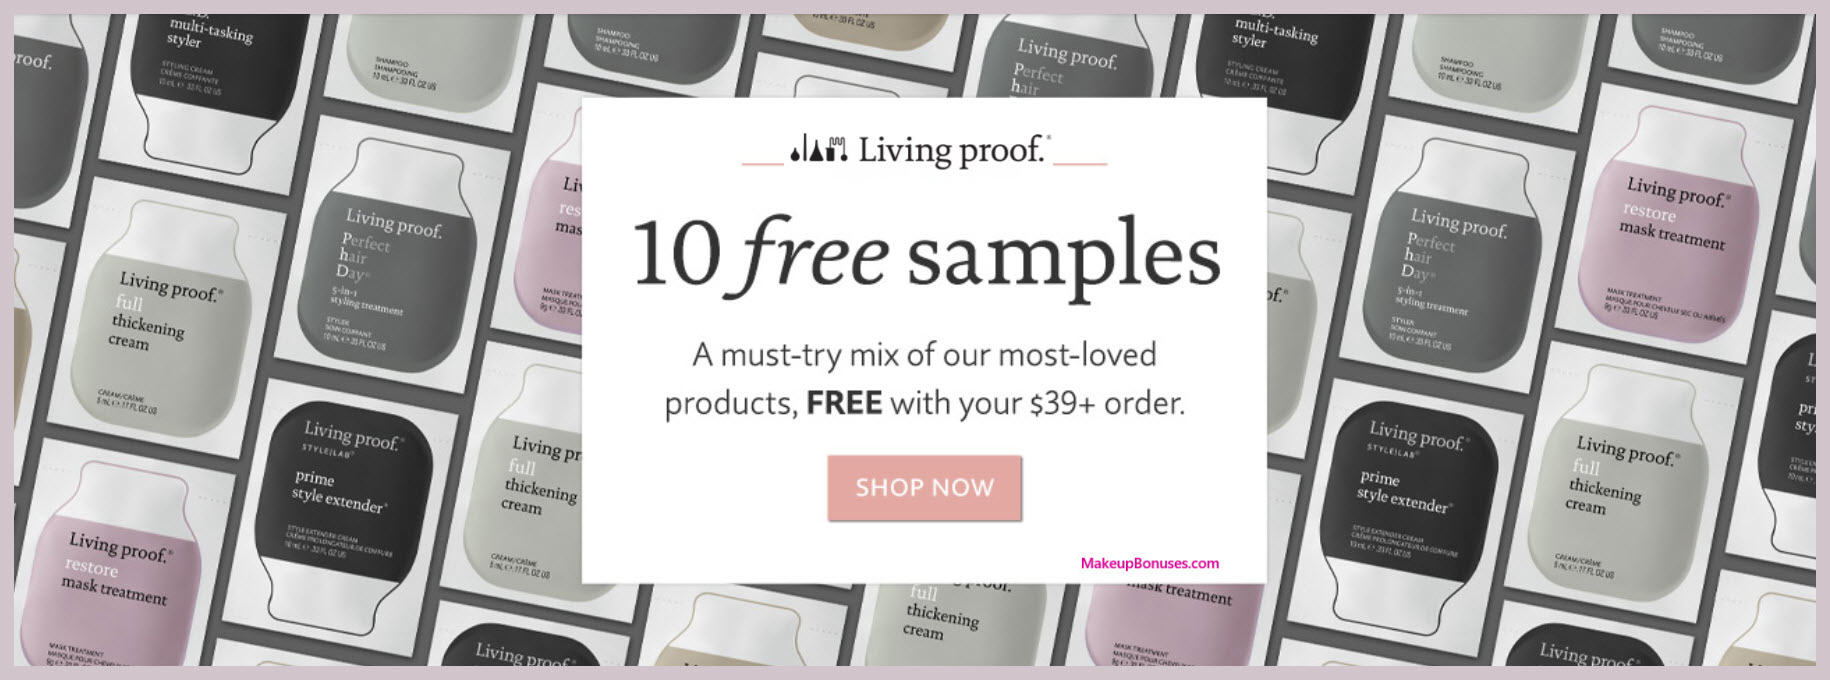 Receive a free 10-pc gift with $39 Living Proof purchase